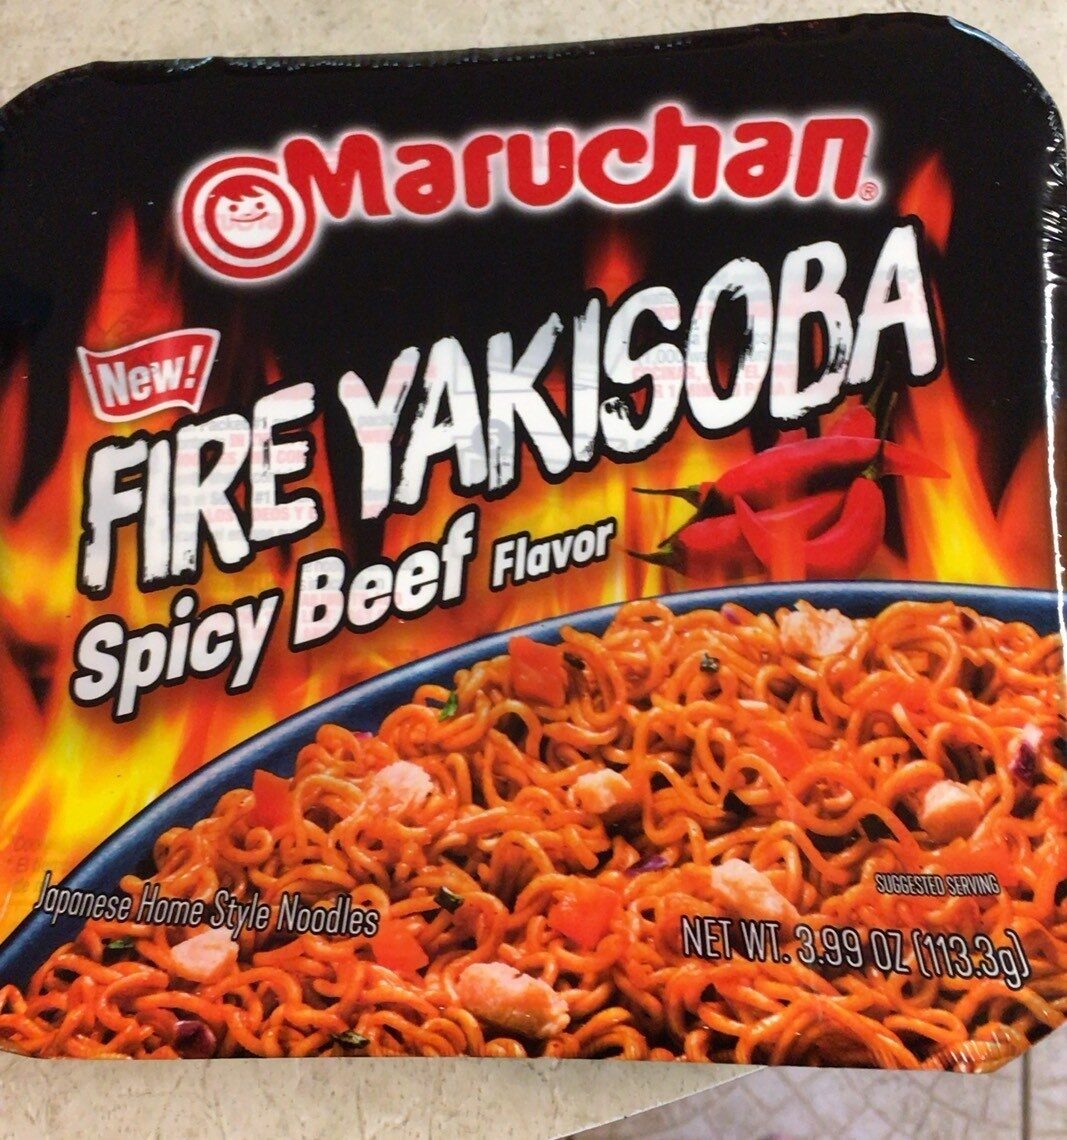 Fire yakisoba spicy beef japanese home style noodles - Product